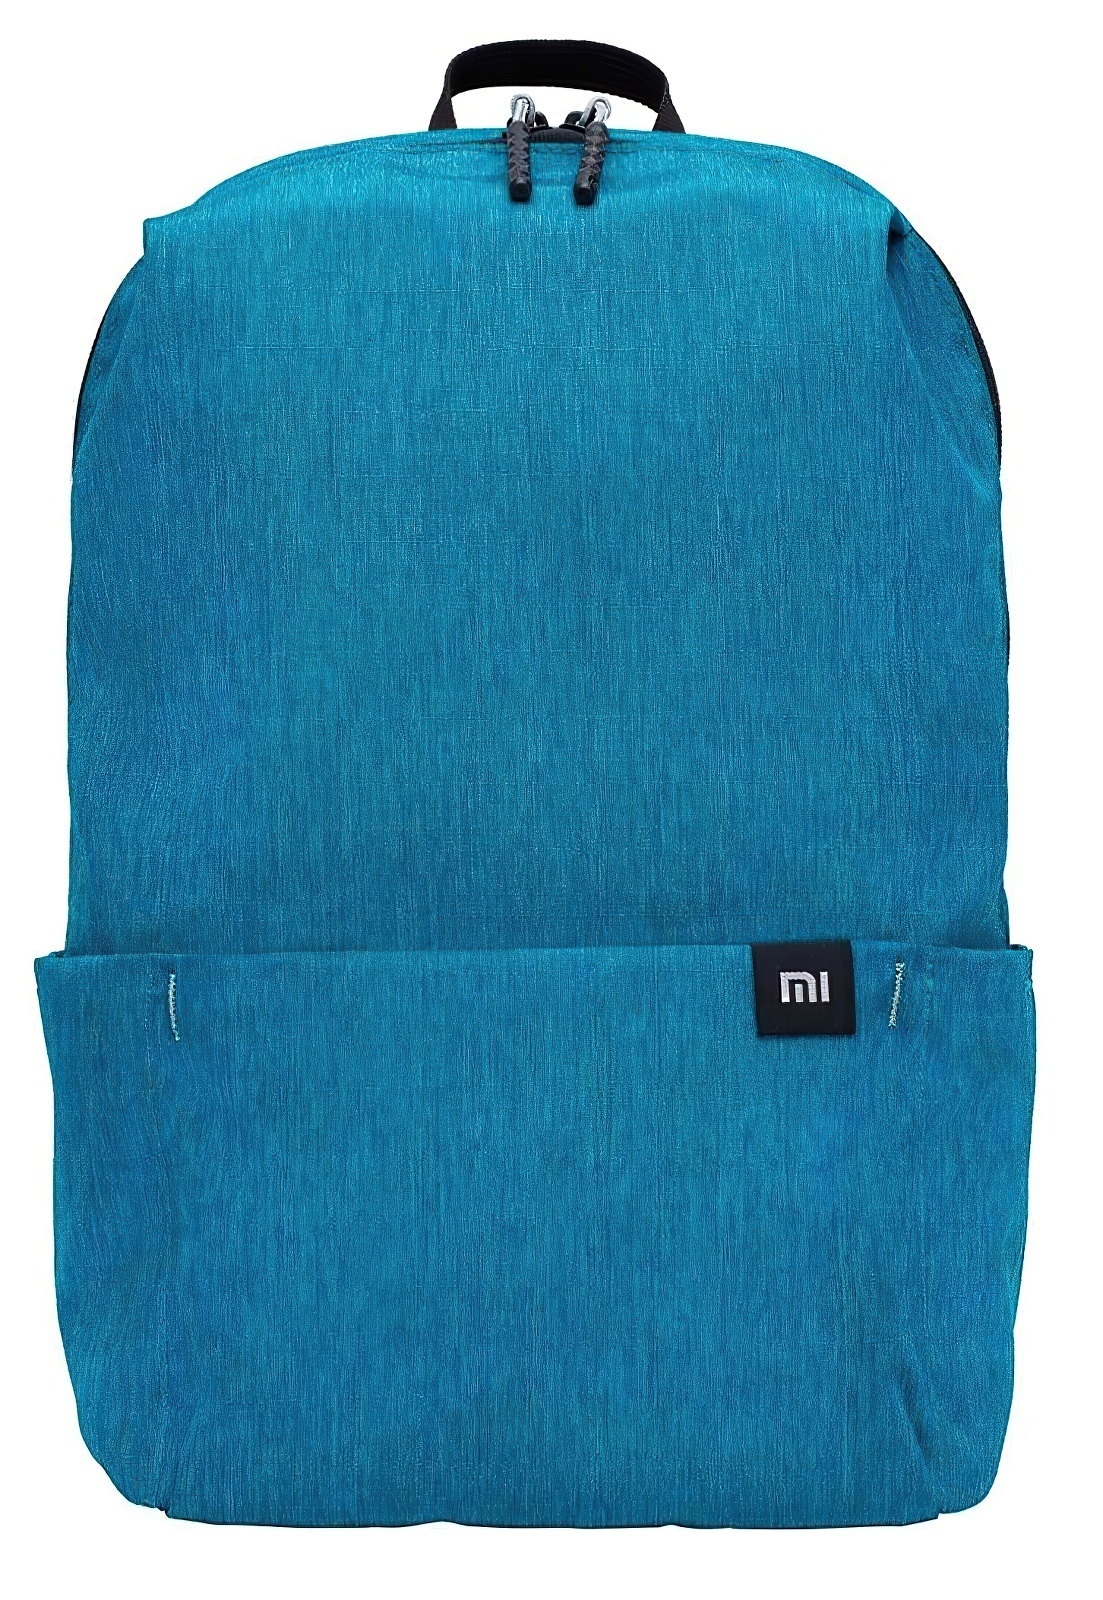 Рюкзак Xiaomi Mi Mini Backpack Bright Blue replaceable ink capsules fountain pen student ef tip blotting ink capsules birthday gift bright tip blue